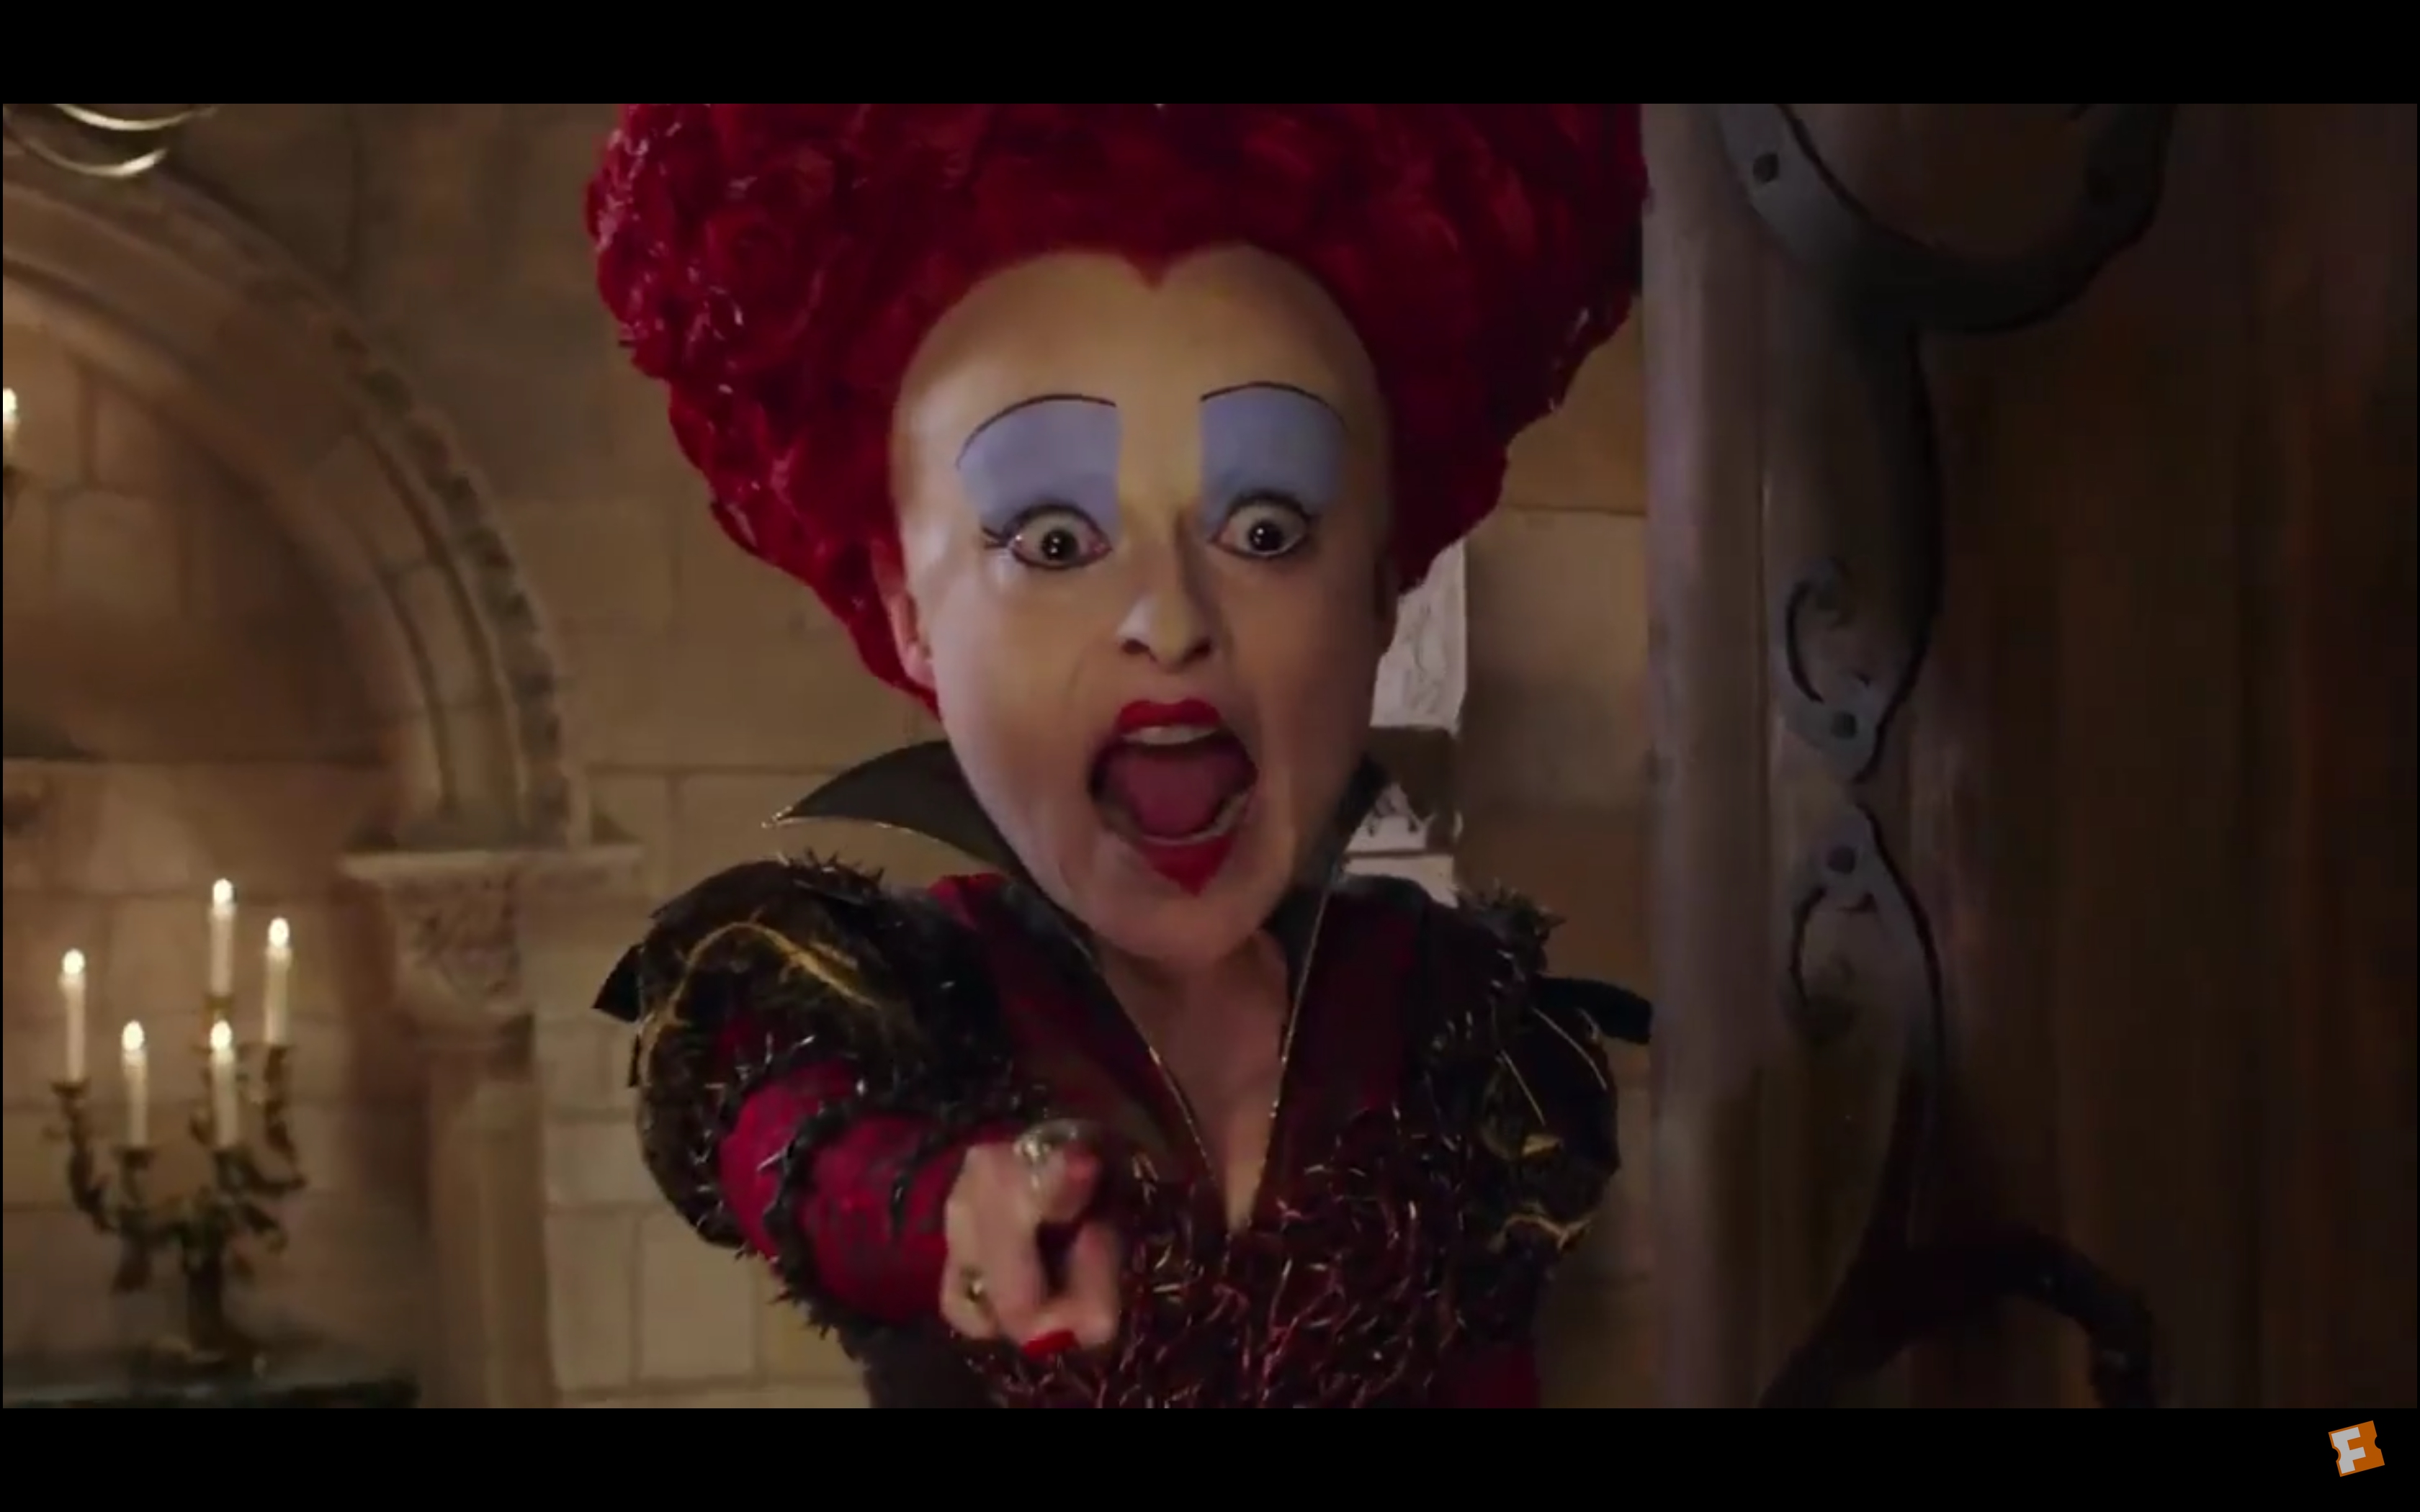 watch alice through the looking glass 2016 online